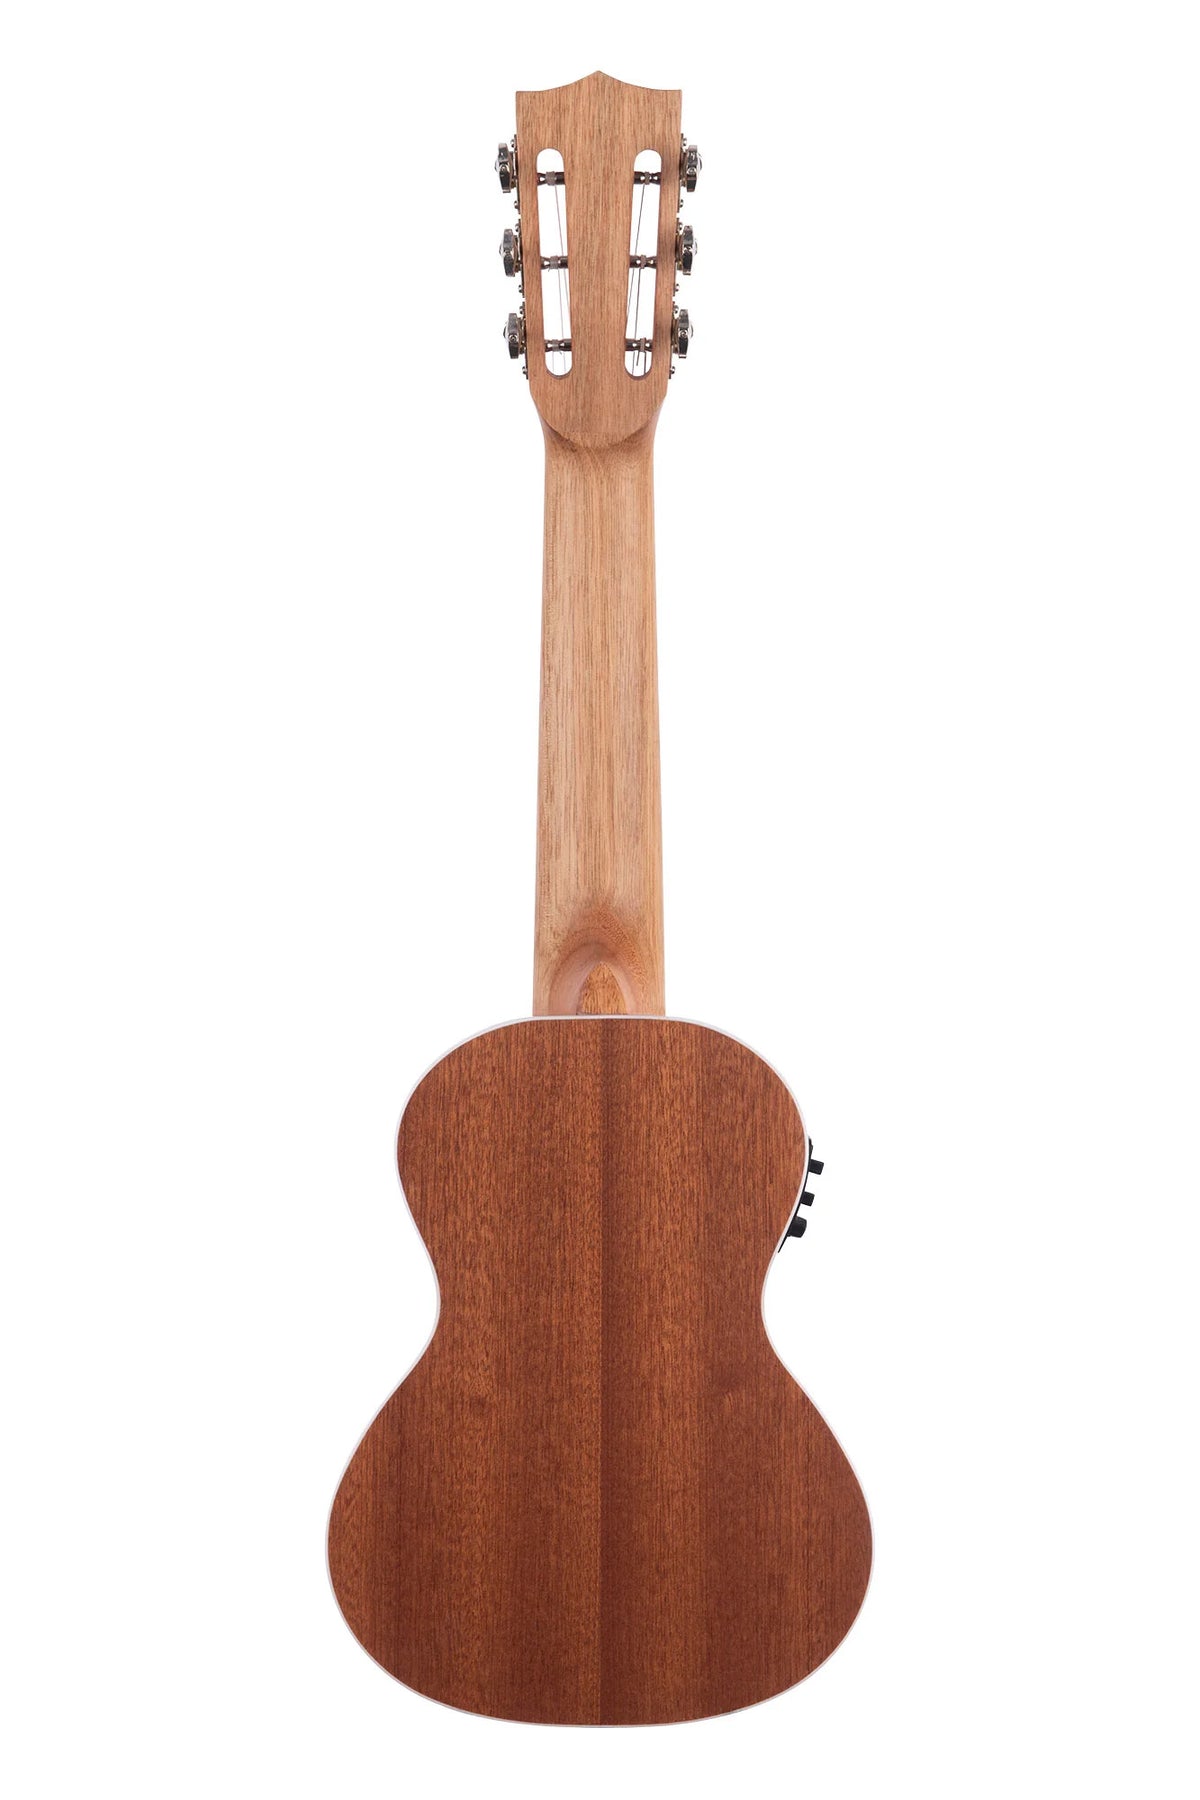 KA-GL-E Mahogany Guitarlele W/EQ w/Gigbag. A combination between ukulele and guitar, the Kala Mahogany Guitarlele packs a lot of fun into a small package. The reserved style of the Mahogany makes for a simple, classic look.  The Guitarlele is lightweight and portable so you can take the fun with you anywhere. An excellent crossover between guitar and ukulele perfect for players of all skill levels.   Ukulele Trading Co Australia